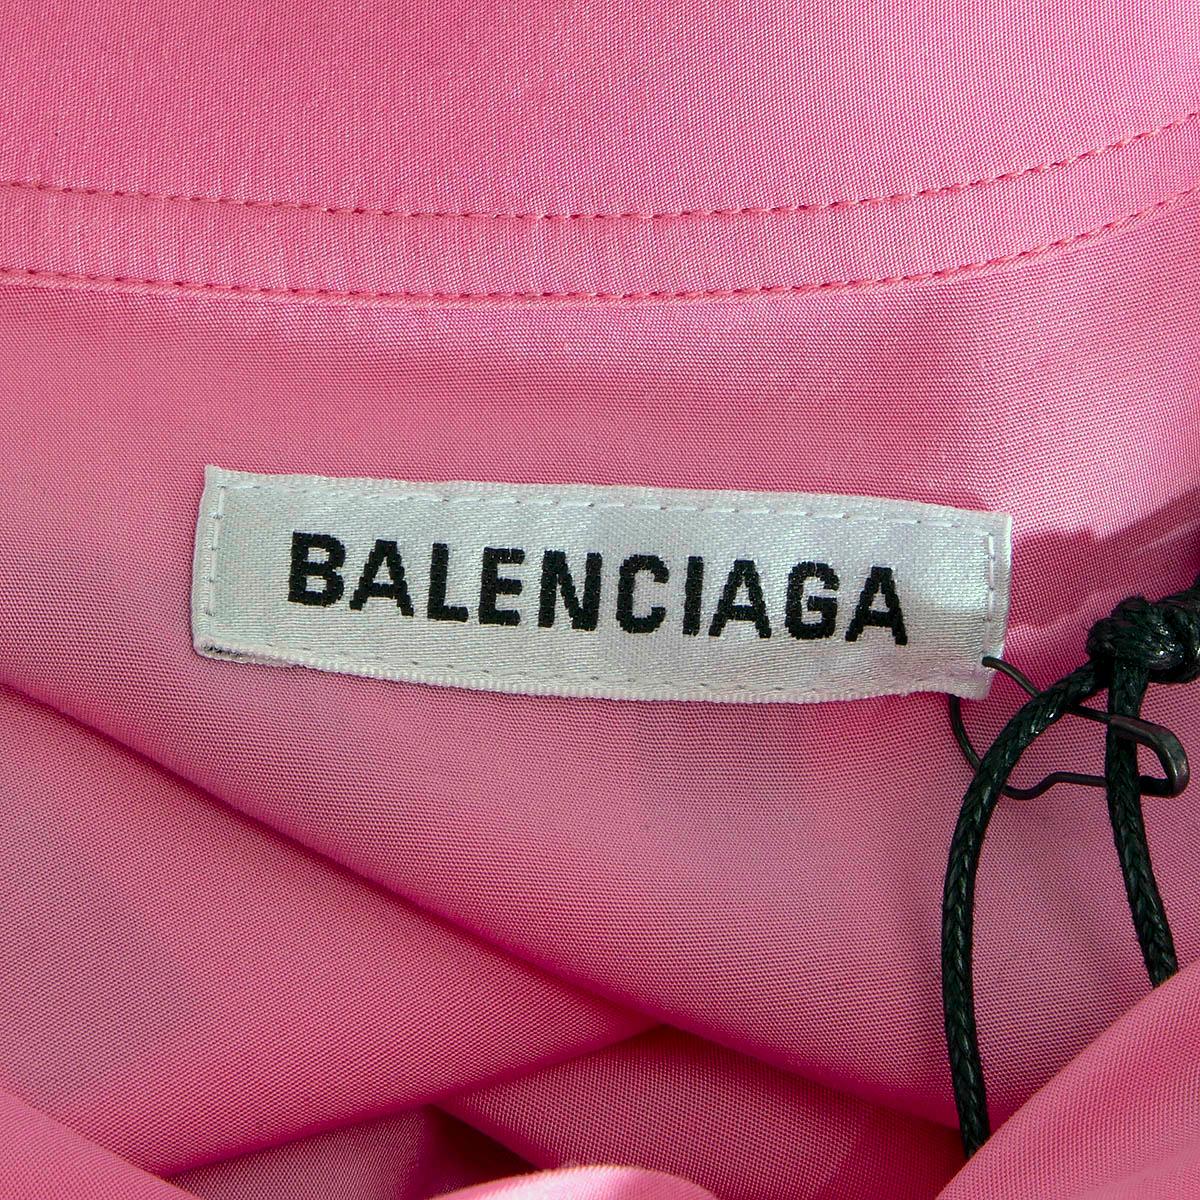 BALENCIAGA bubblegum pink lyocell NEW SWING PUSSY BOW Blouse Shirt 40 M For Sale 1